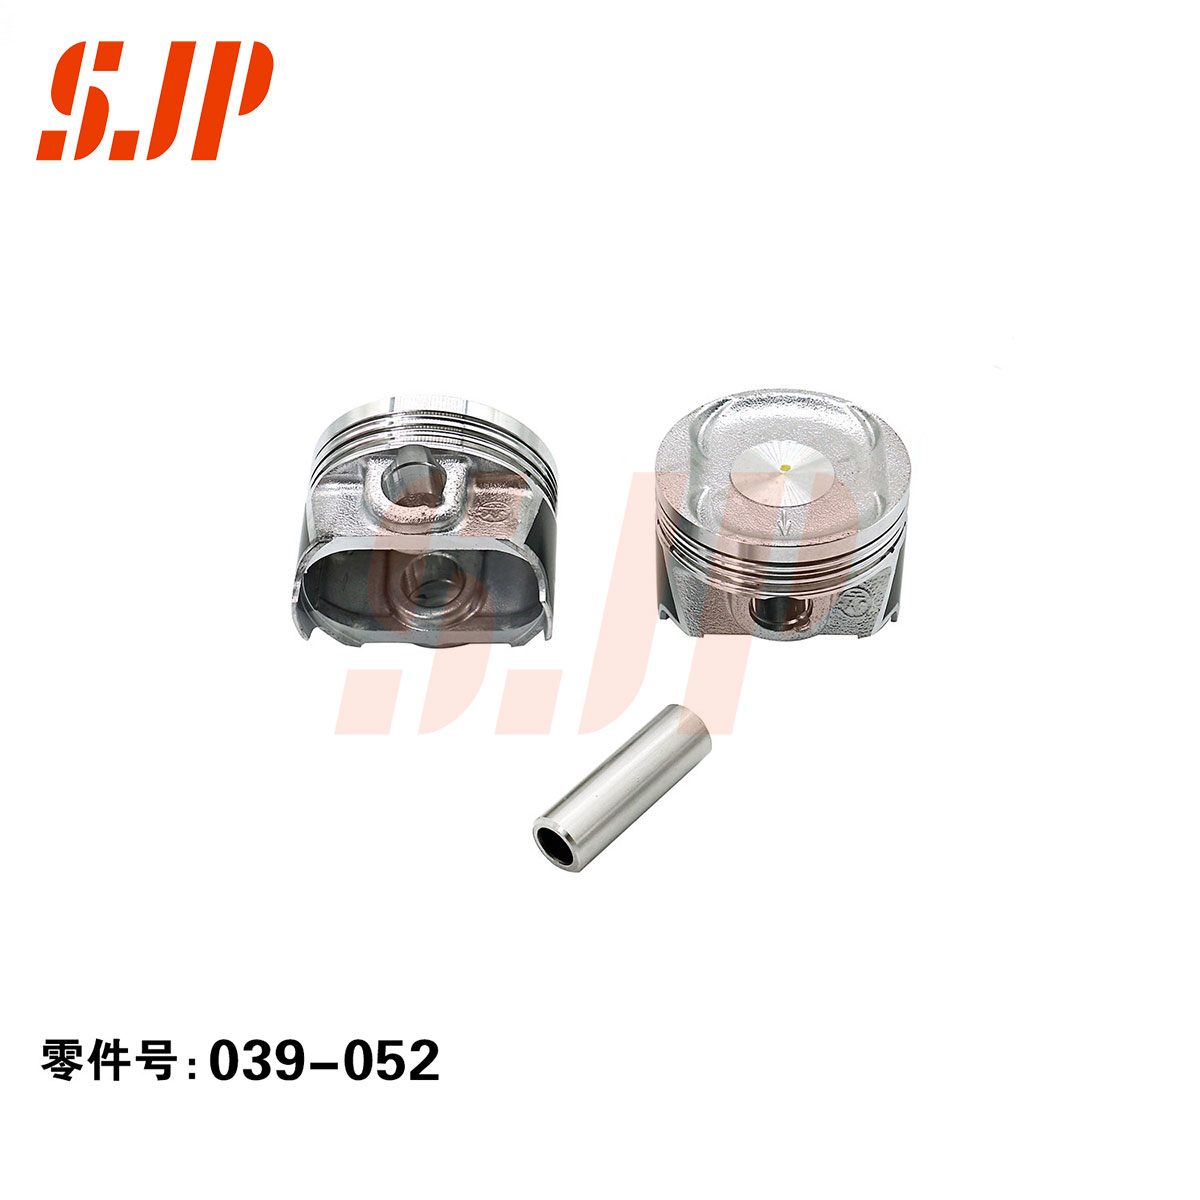 SJ-039-052 Piston And Pin For CG12